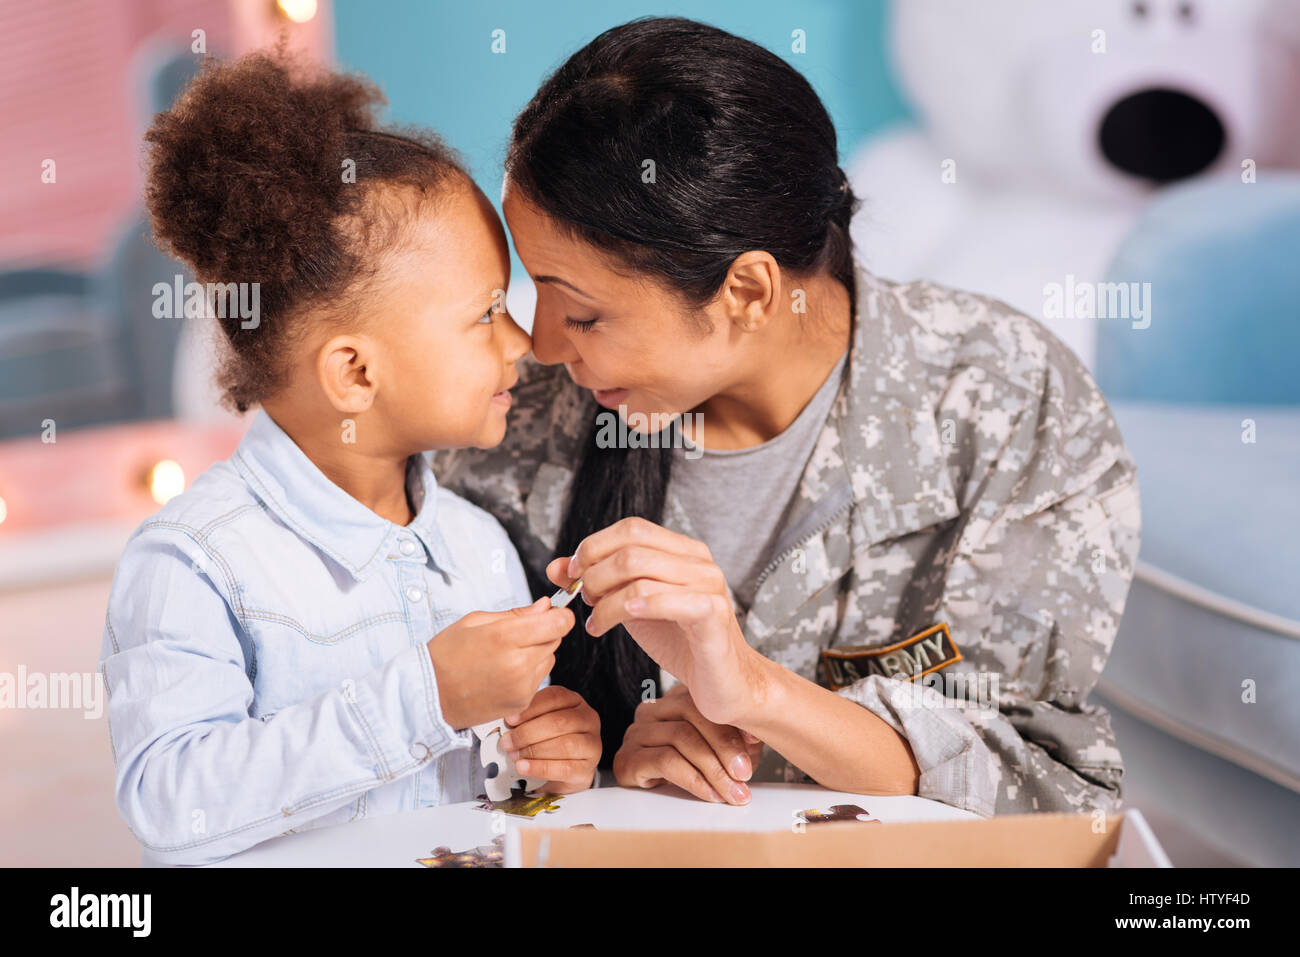 Stunning mom and daughter sharing a family moment Stock Photo